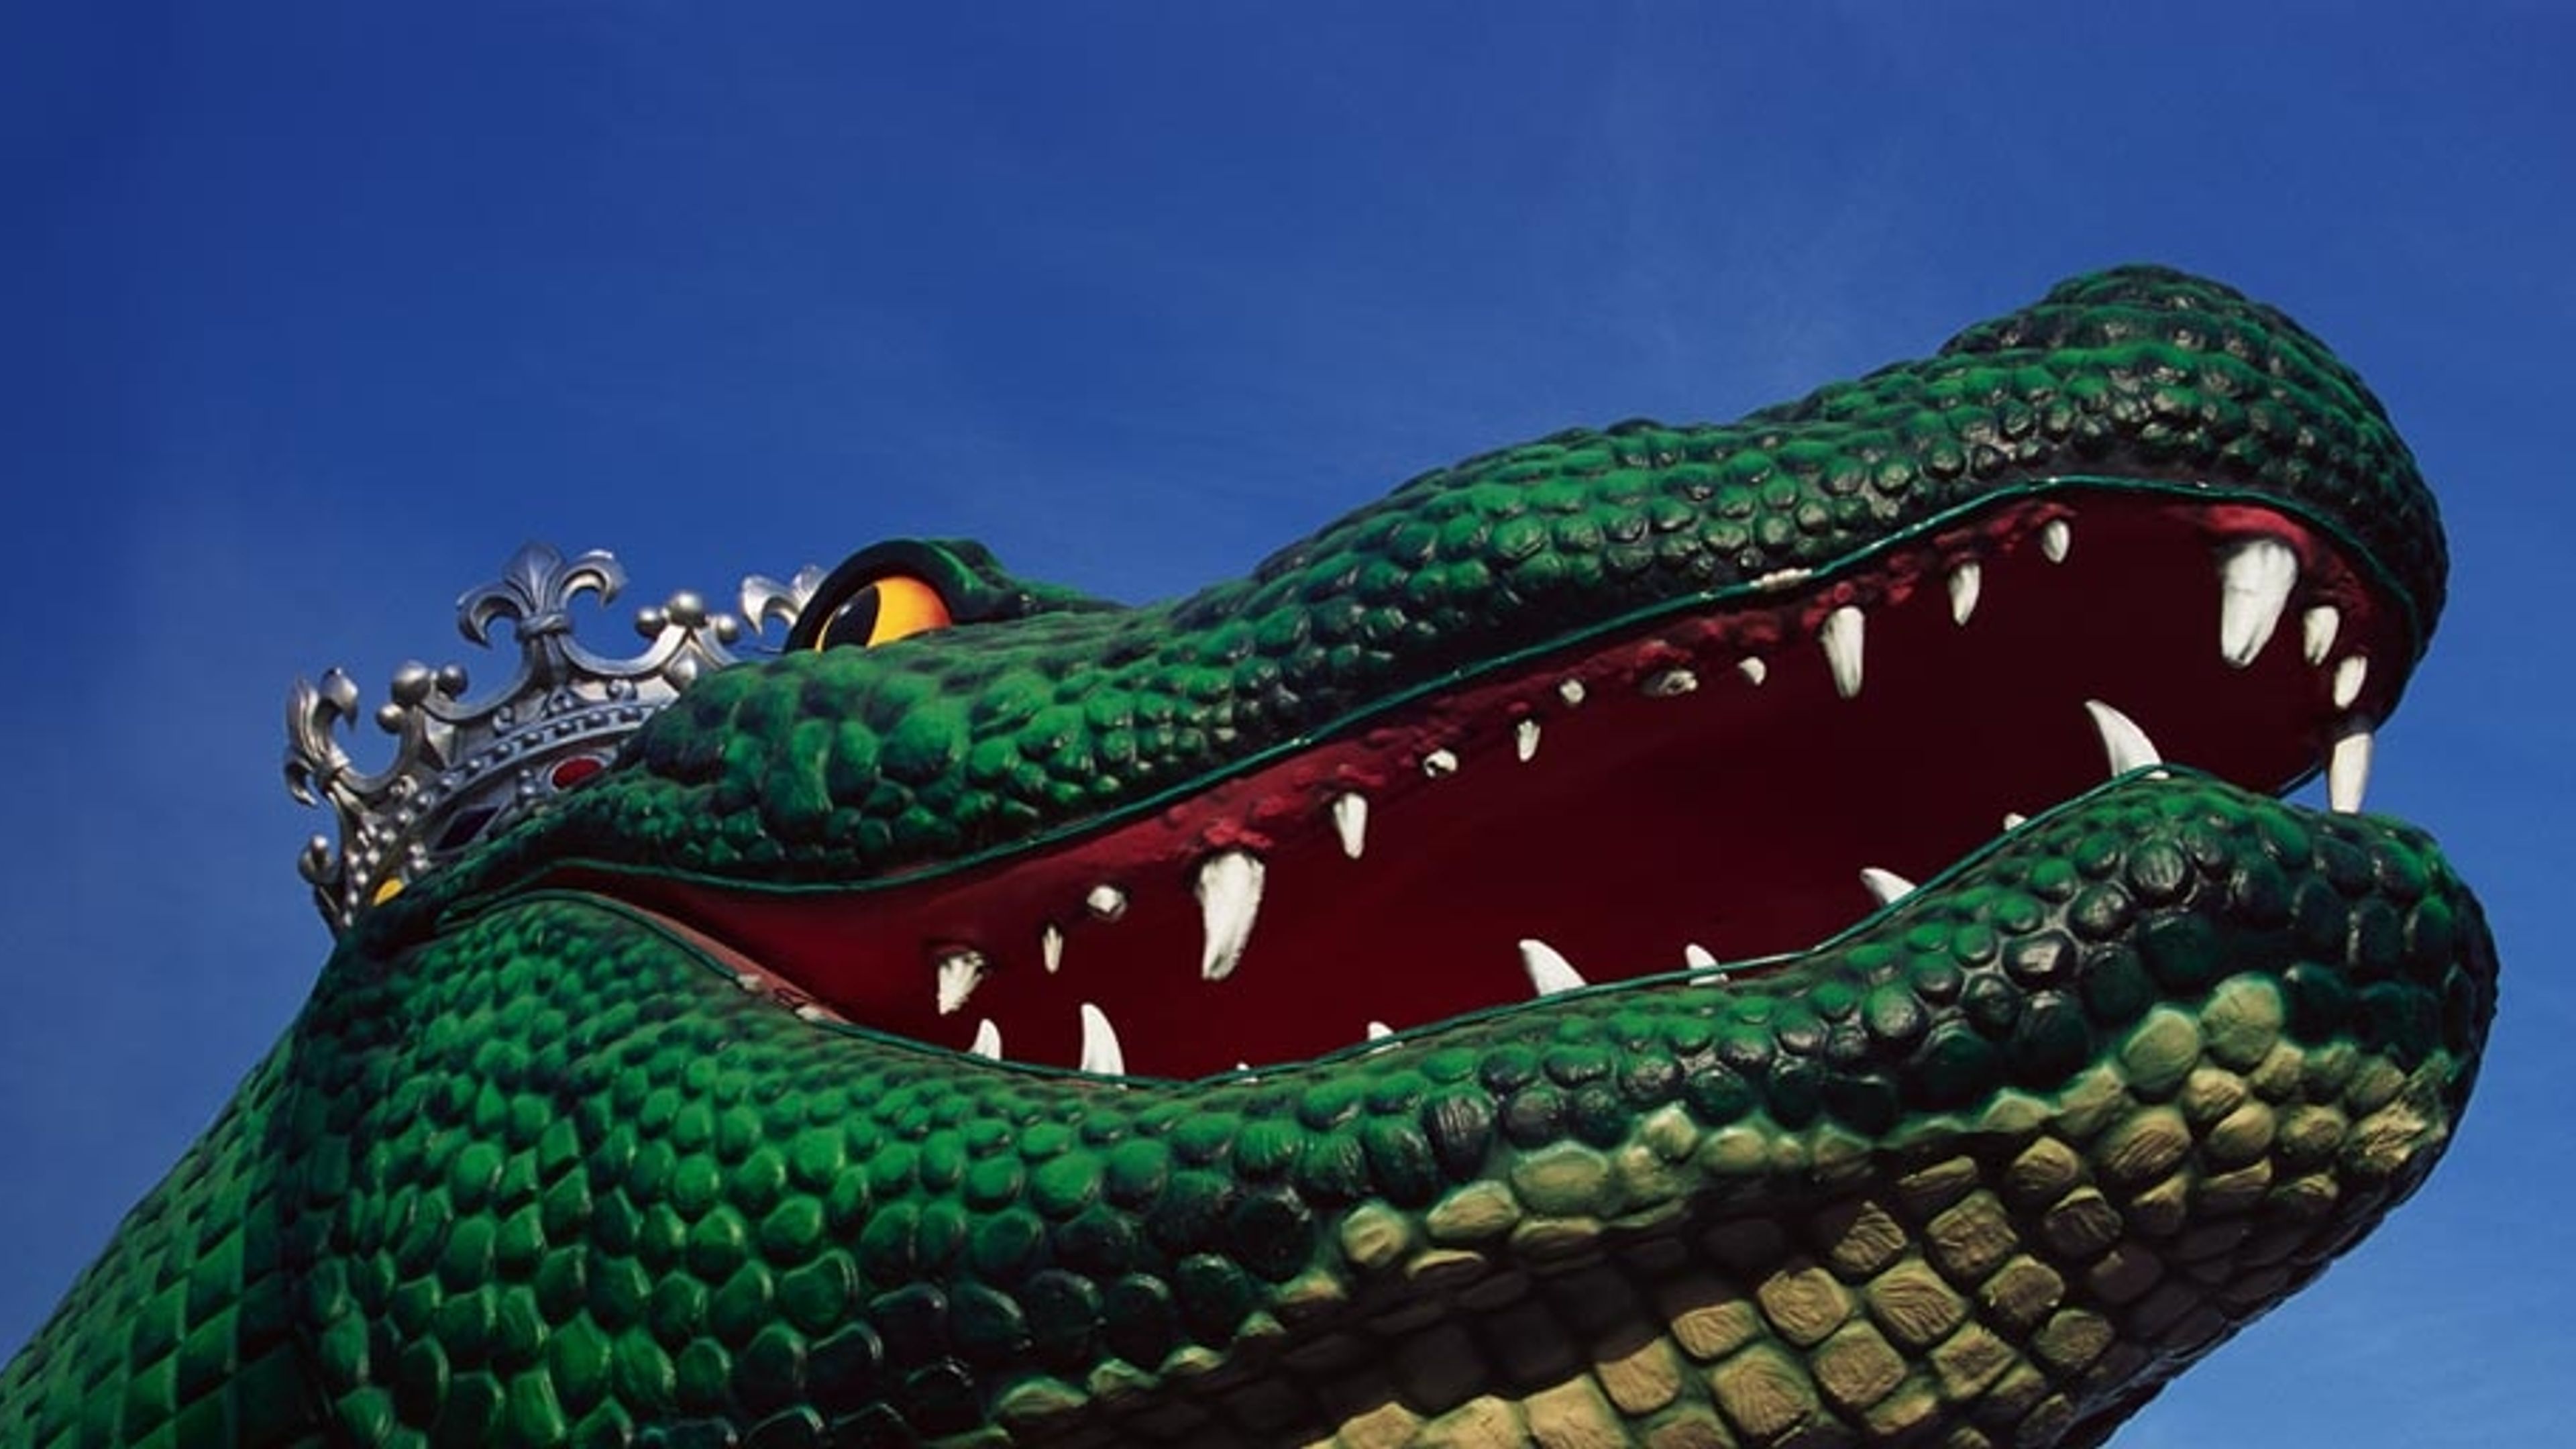 Alligator float during the Mardi Gras celebration in New Orleans, Louisiana  - Bing Gallery